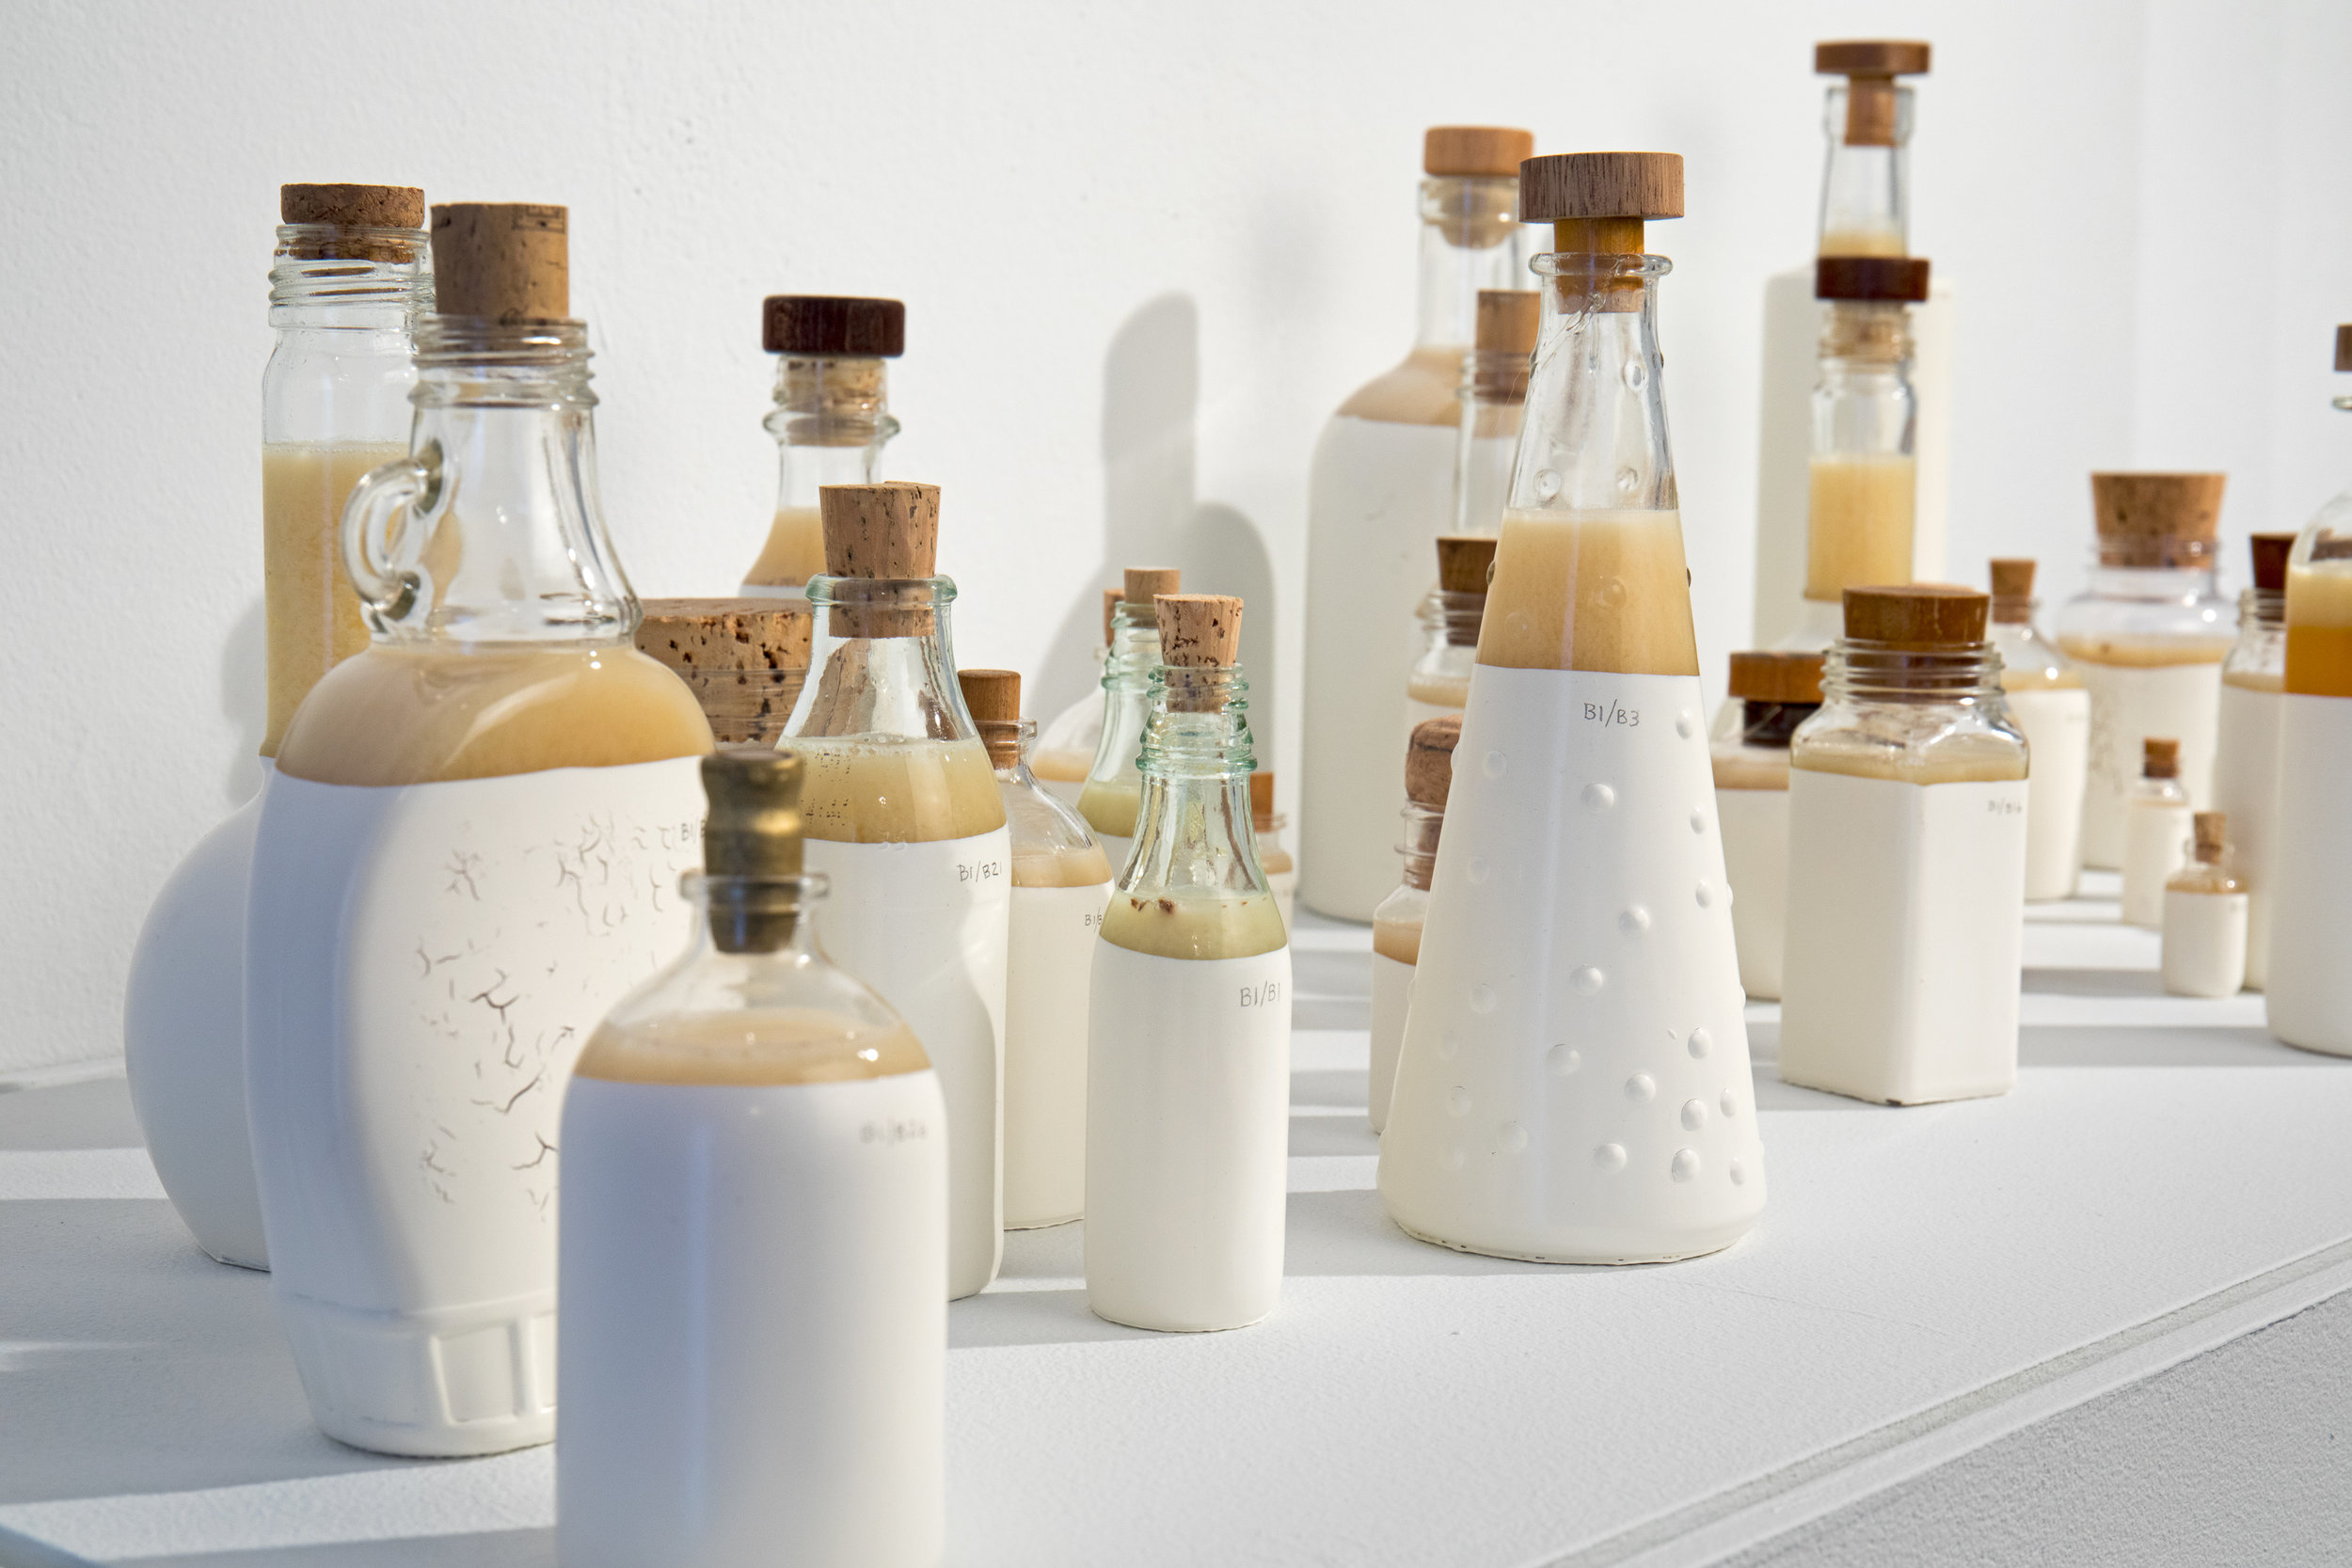 This project is an exploration of the concept of circular economy, through the collection from (reclaimed oil) and return to a community (soap).